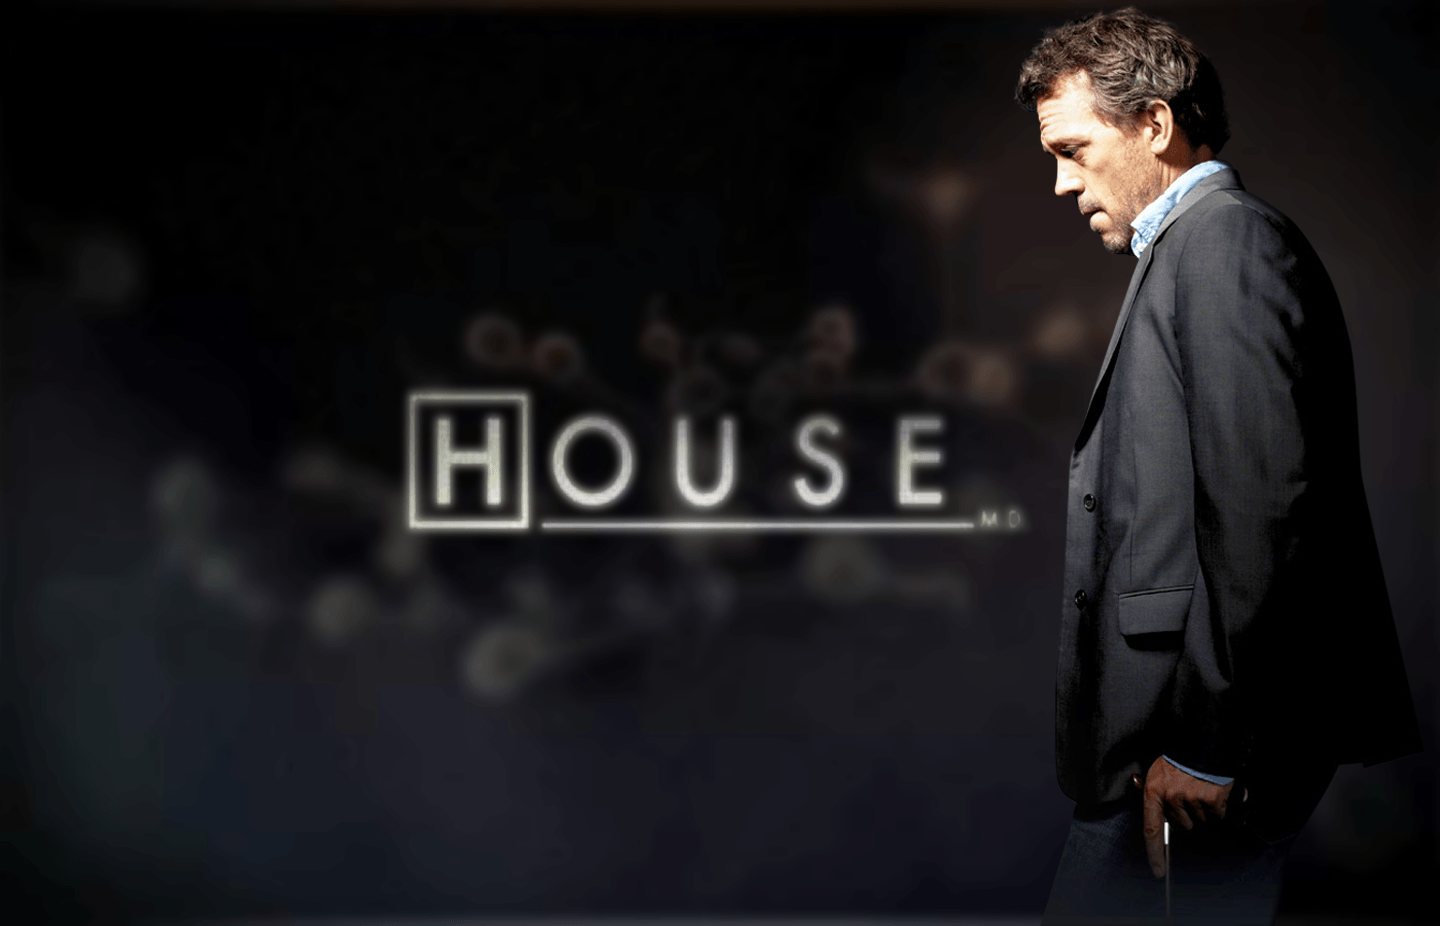 Some Of The Best House Md Songs - HD Wallpaper 